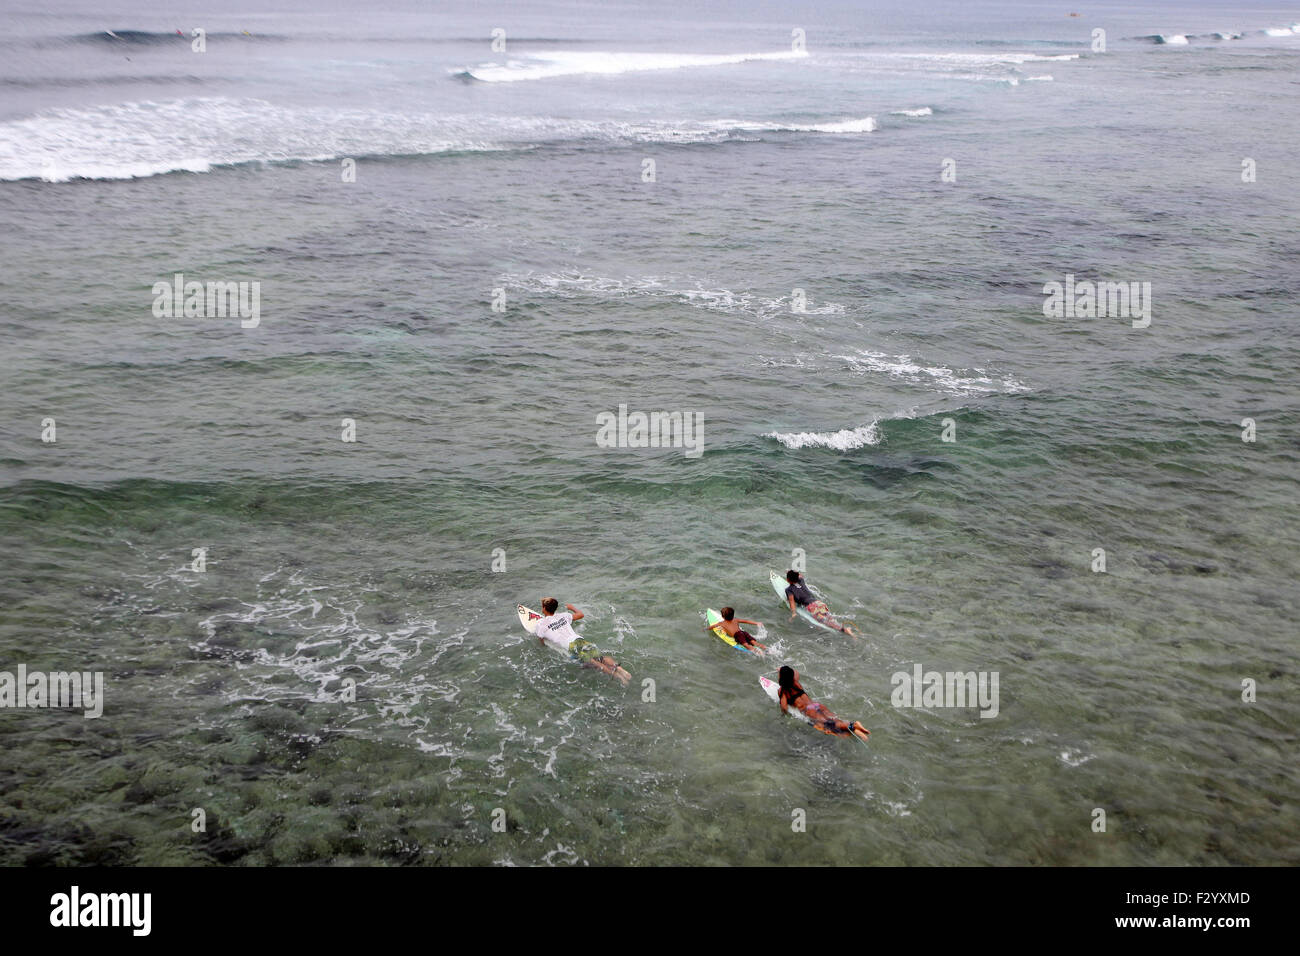 Siargao Island, Philippines. 26th Sep, 2015. Tourists surf in Siargao Island, the Philippines, Sept. 26, 2015. The presidential palace Malacanang said Friday that the Philippines is still generally safe after travel advisories were issued by foreign countries following last Monday's kidnapping at an island-resort in Davao del Norte. © Rouelle Umali/Xinhua/Alamy Live News Stock Photo